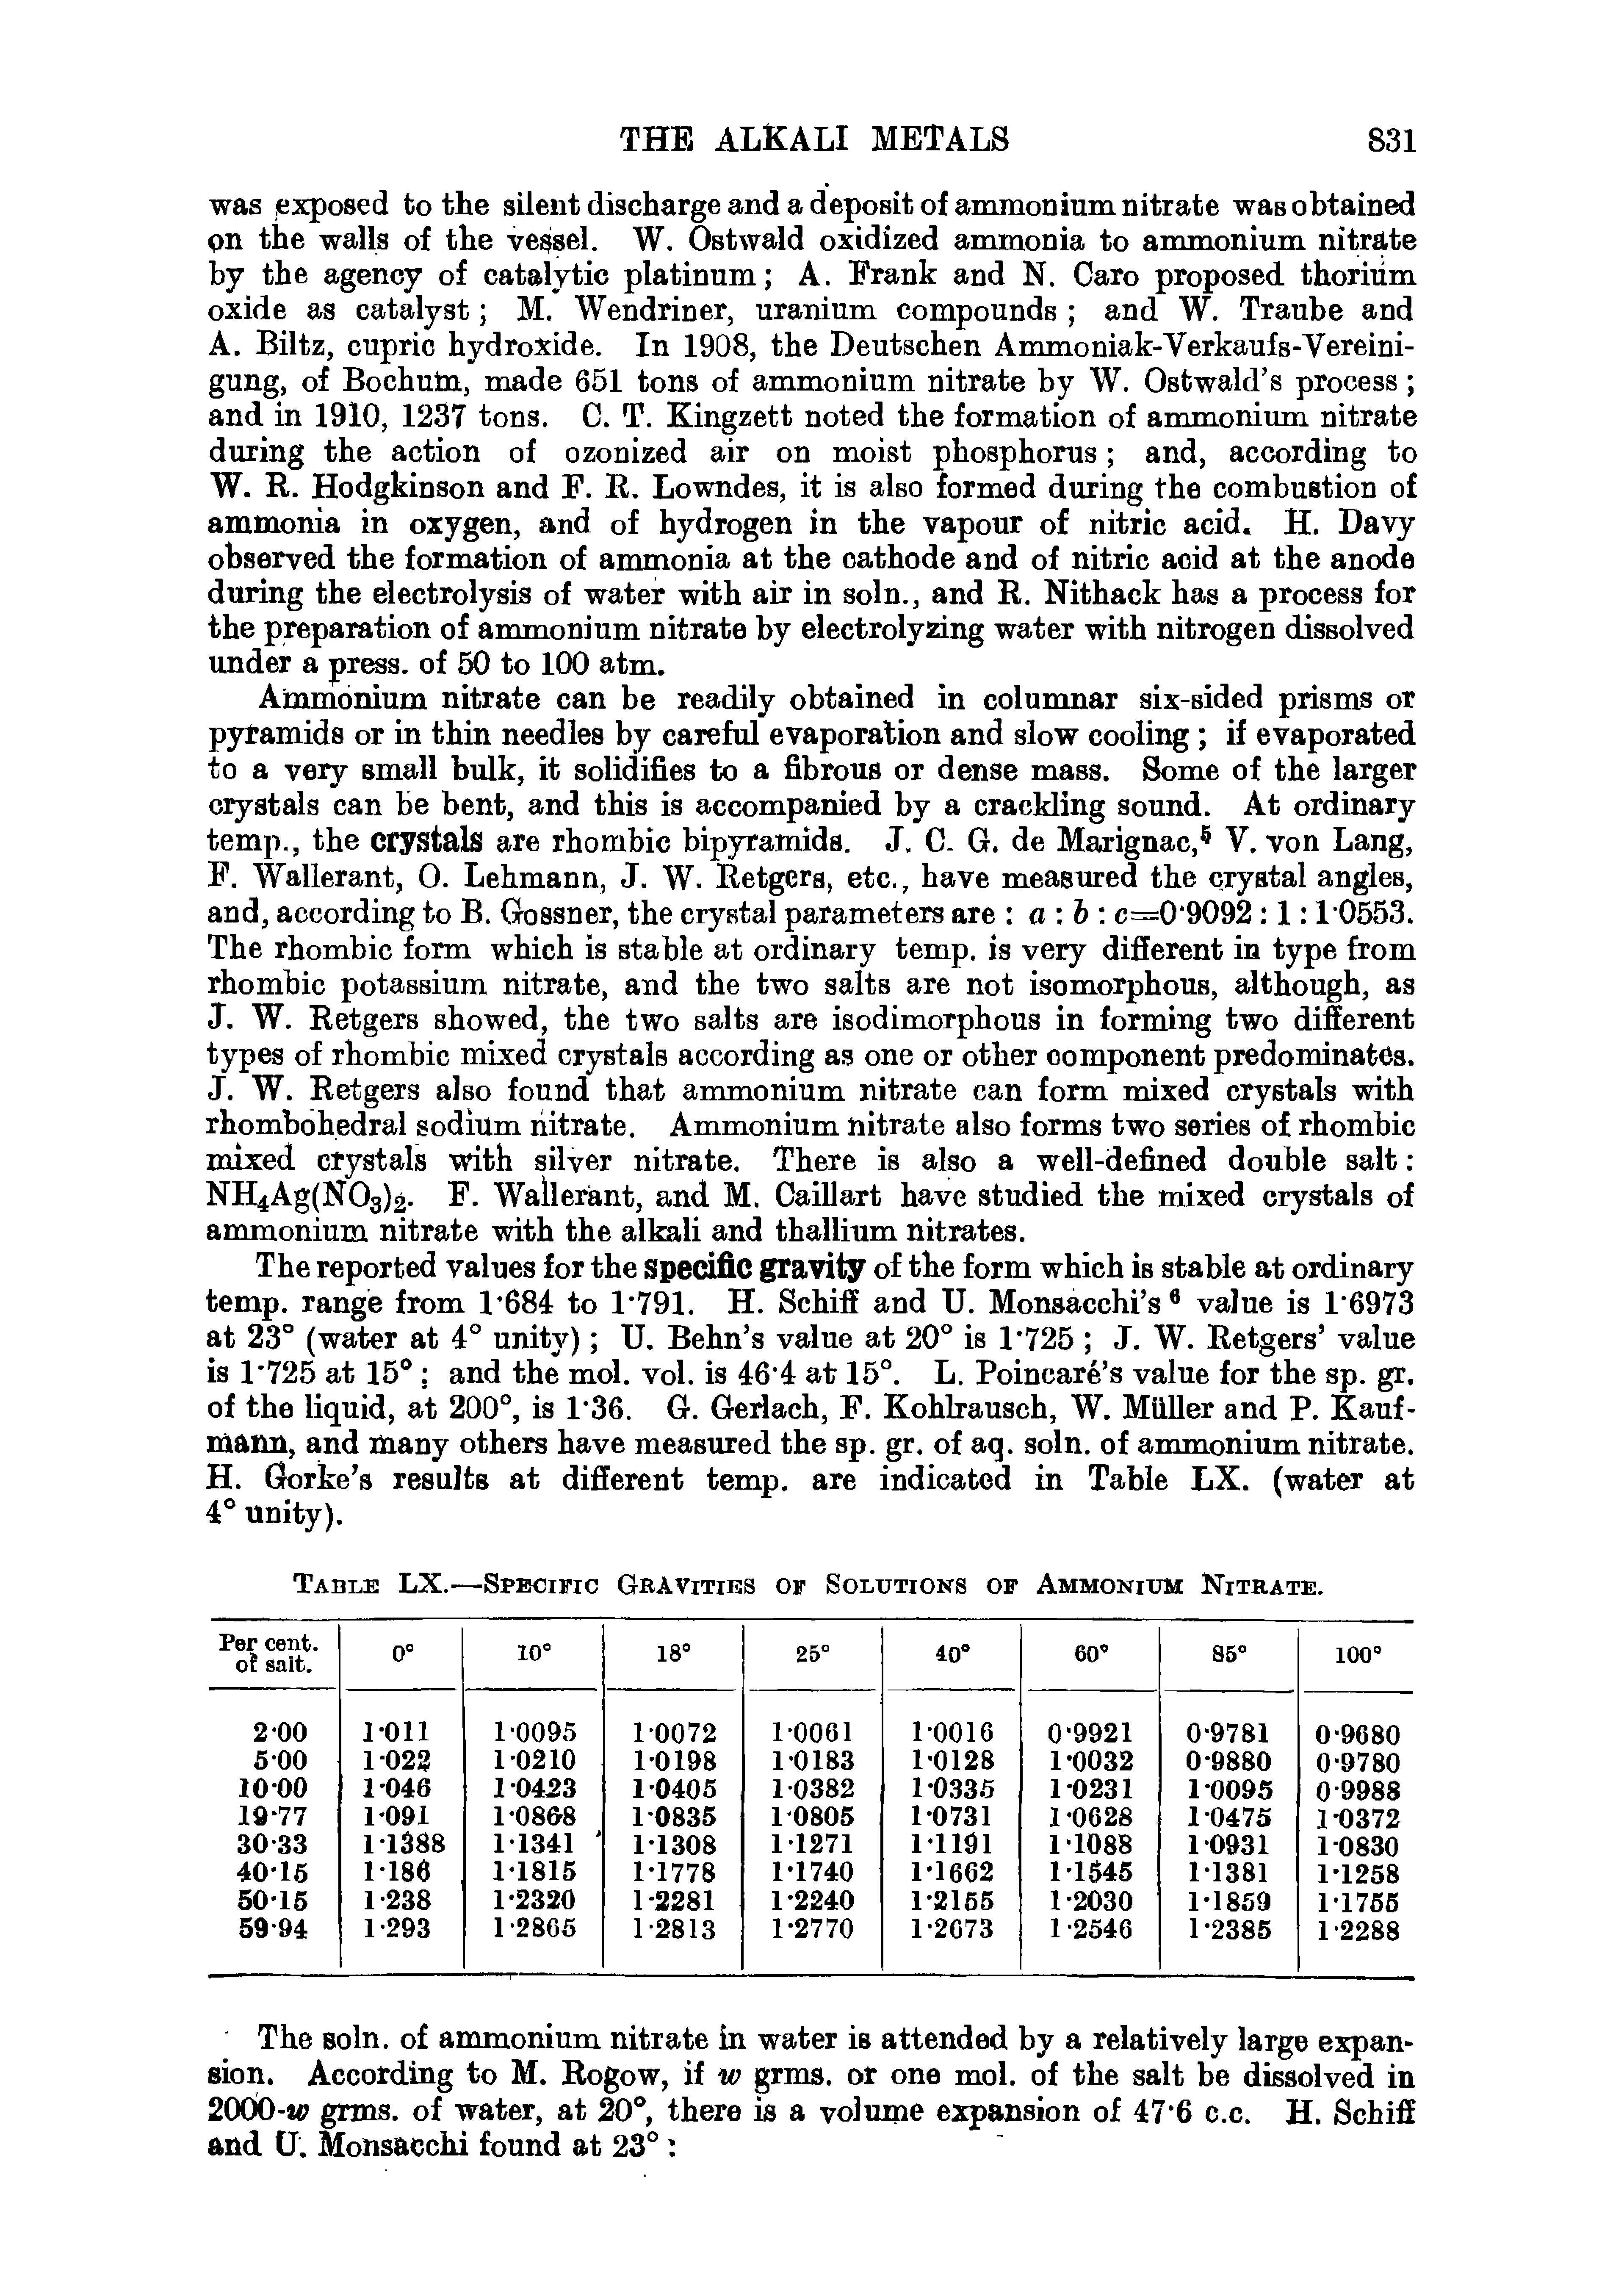 Table LX.—Specific Gravities of Solutions of Ammonium Nitrate.